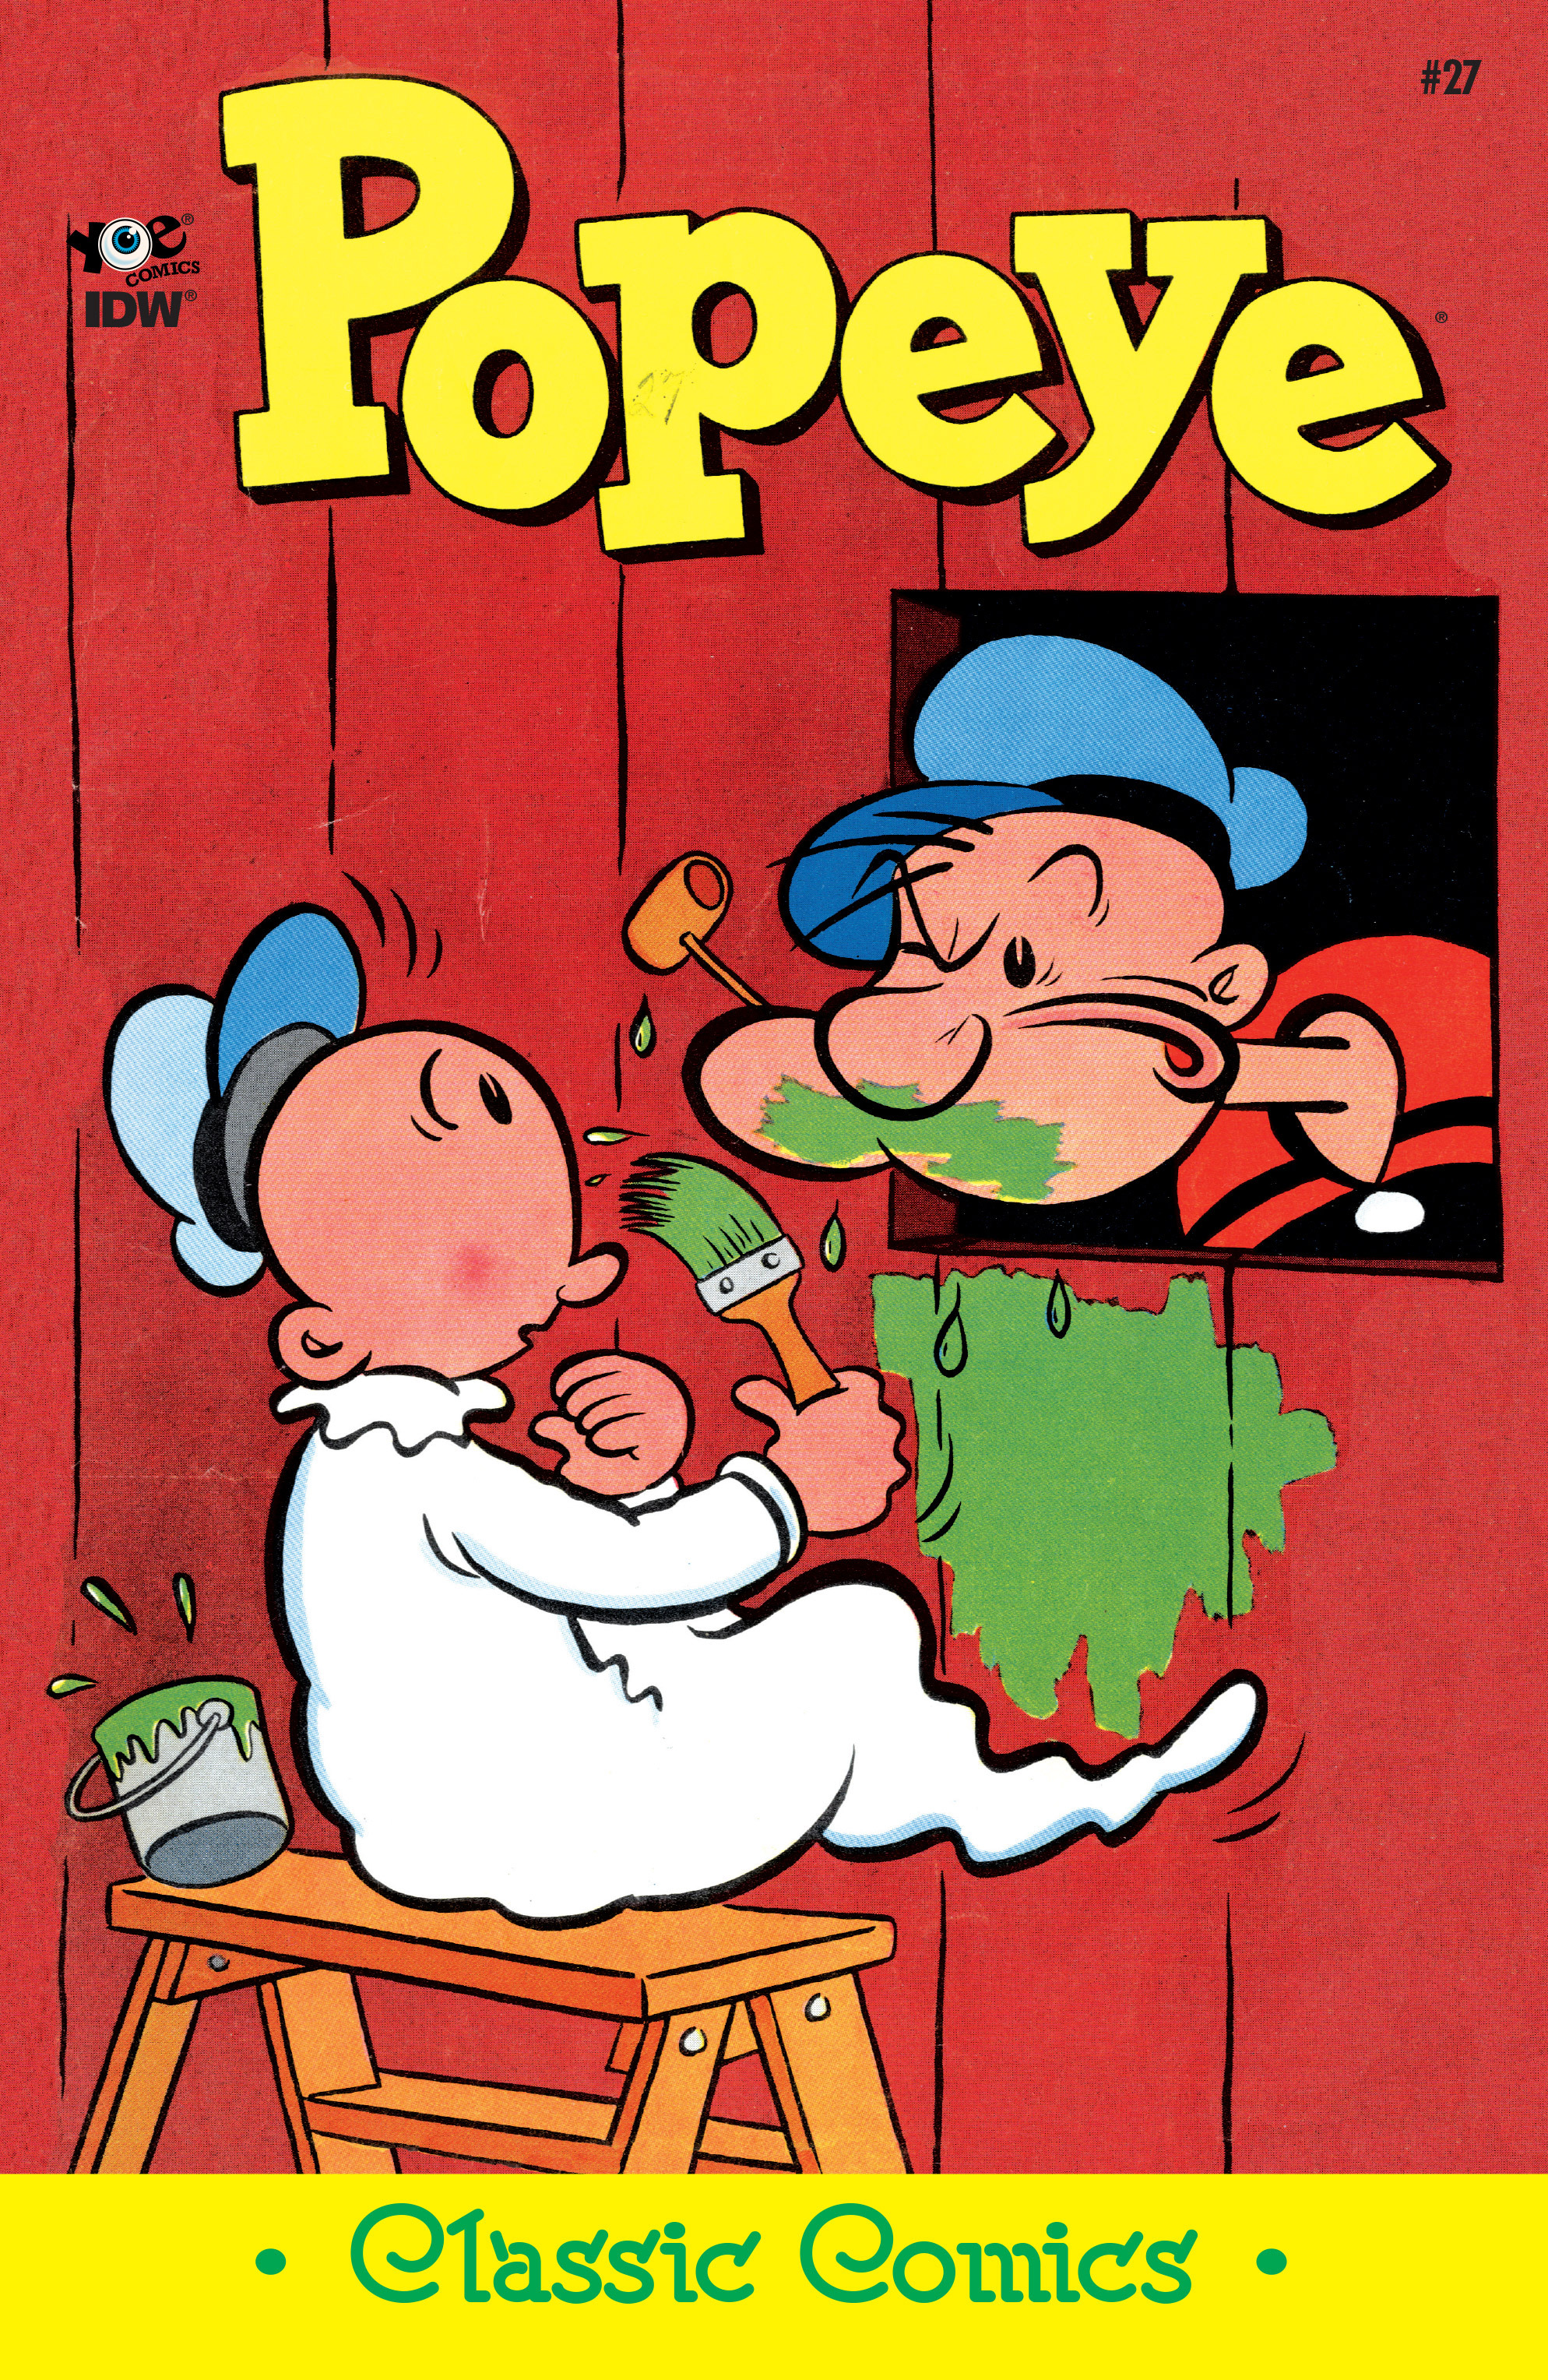 Read online Classic Popeye comic -  Issue #27 - 1